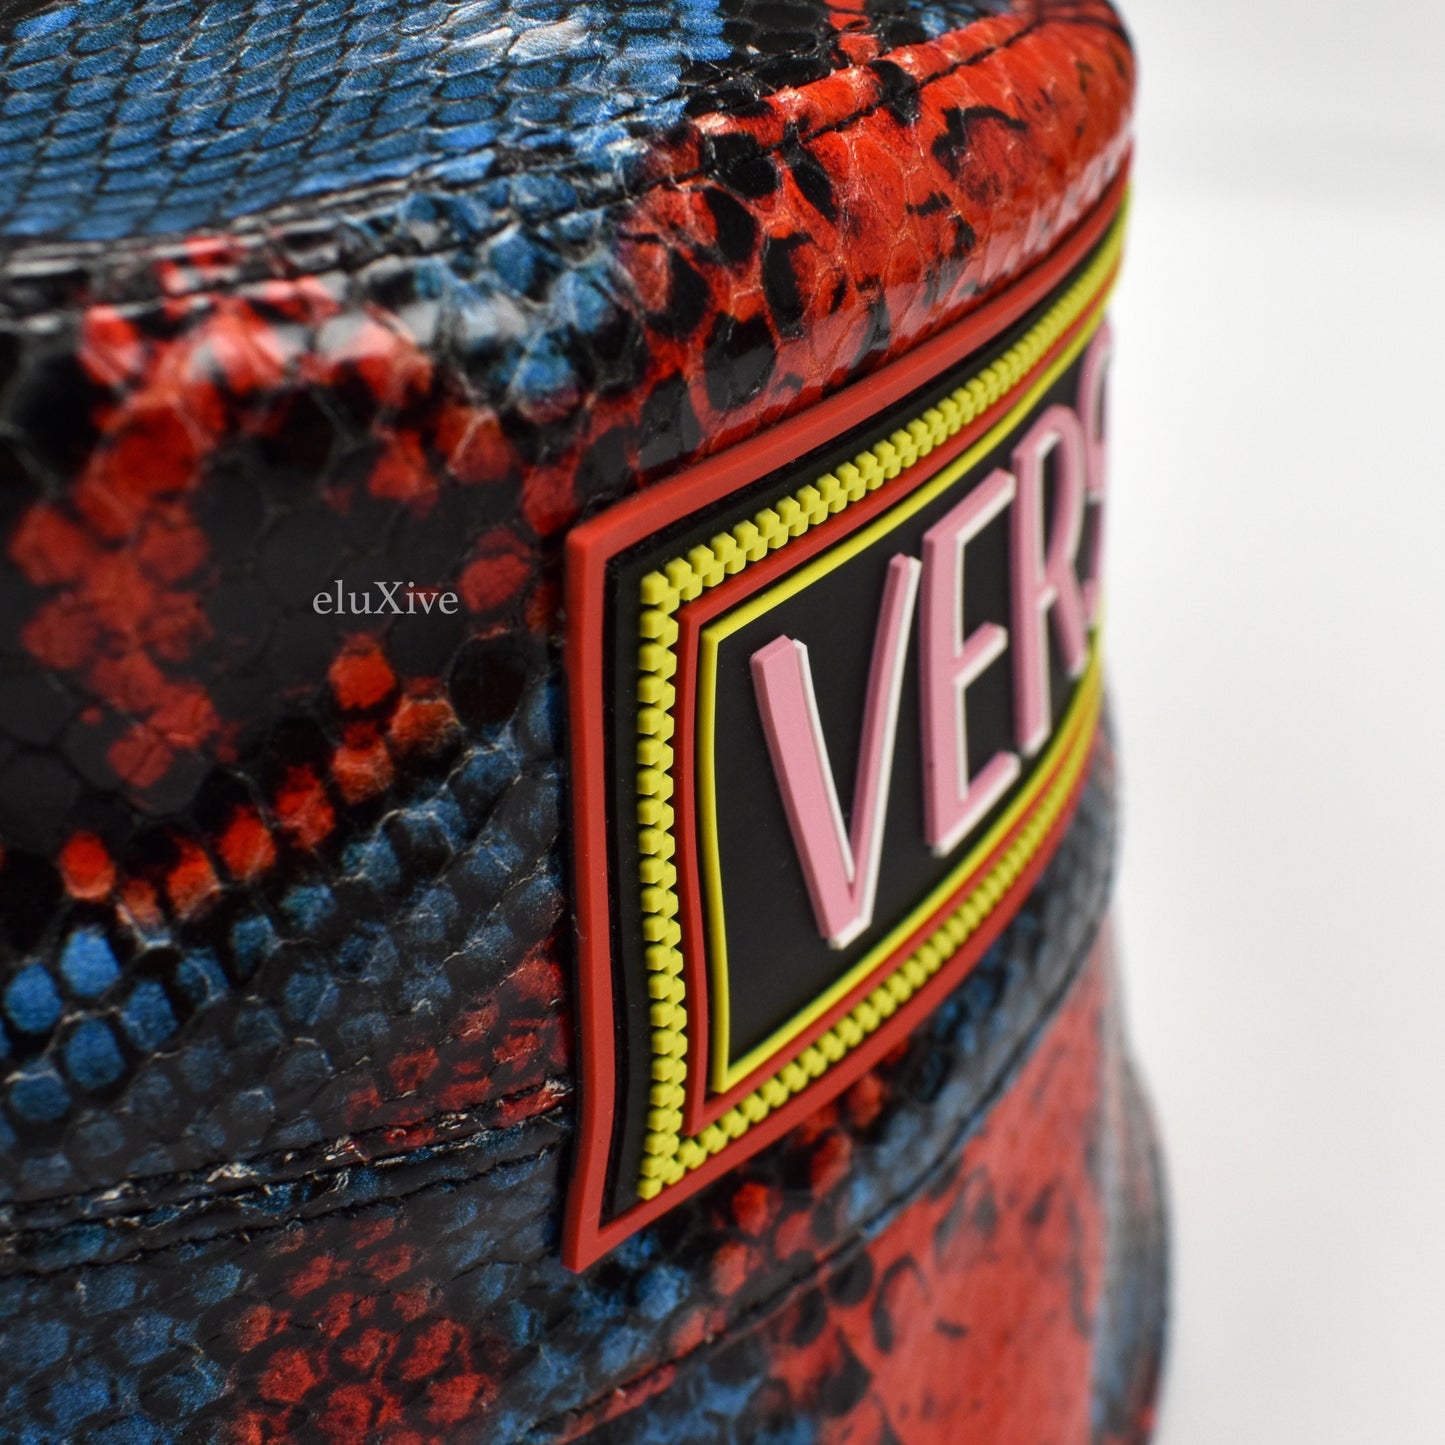 Versace - Red & Blue Snake Print Leather Bucket Hat